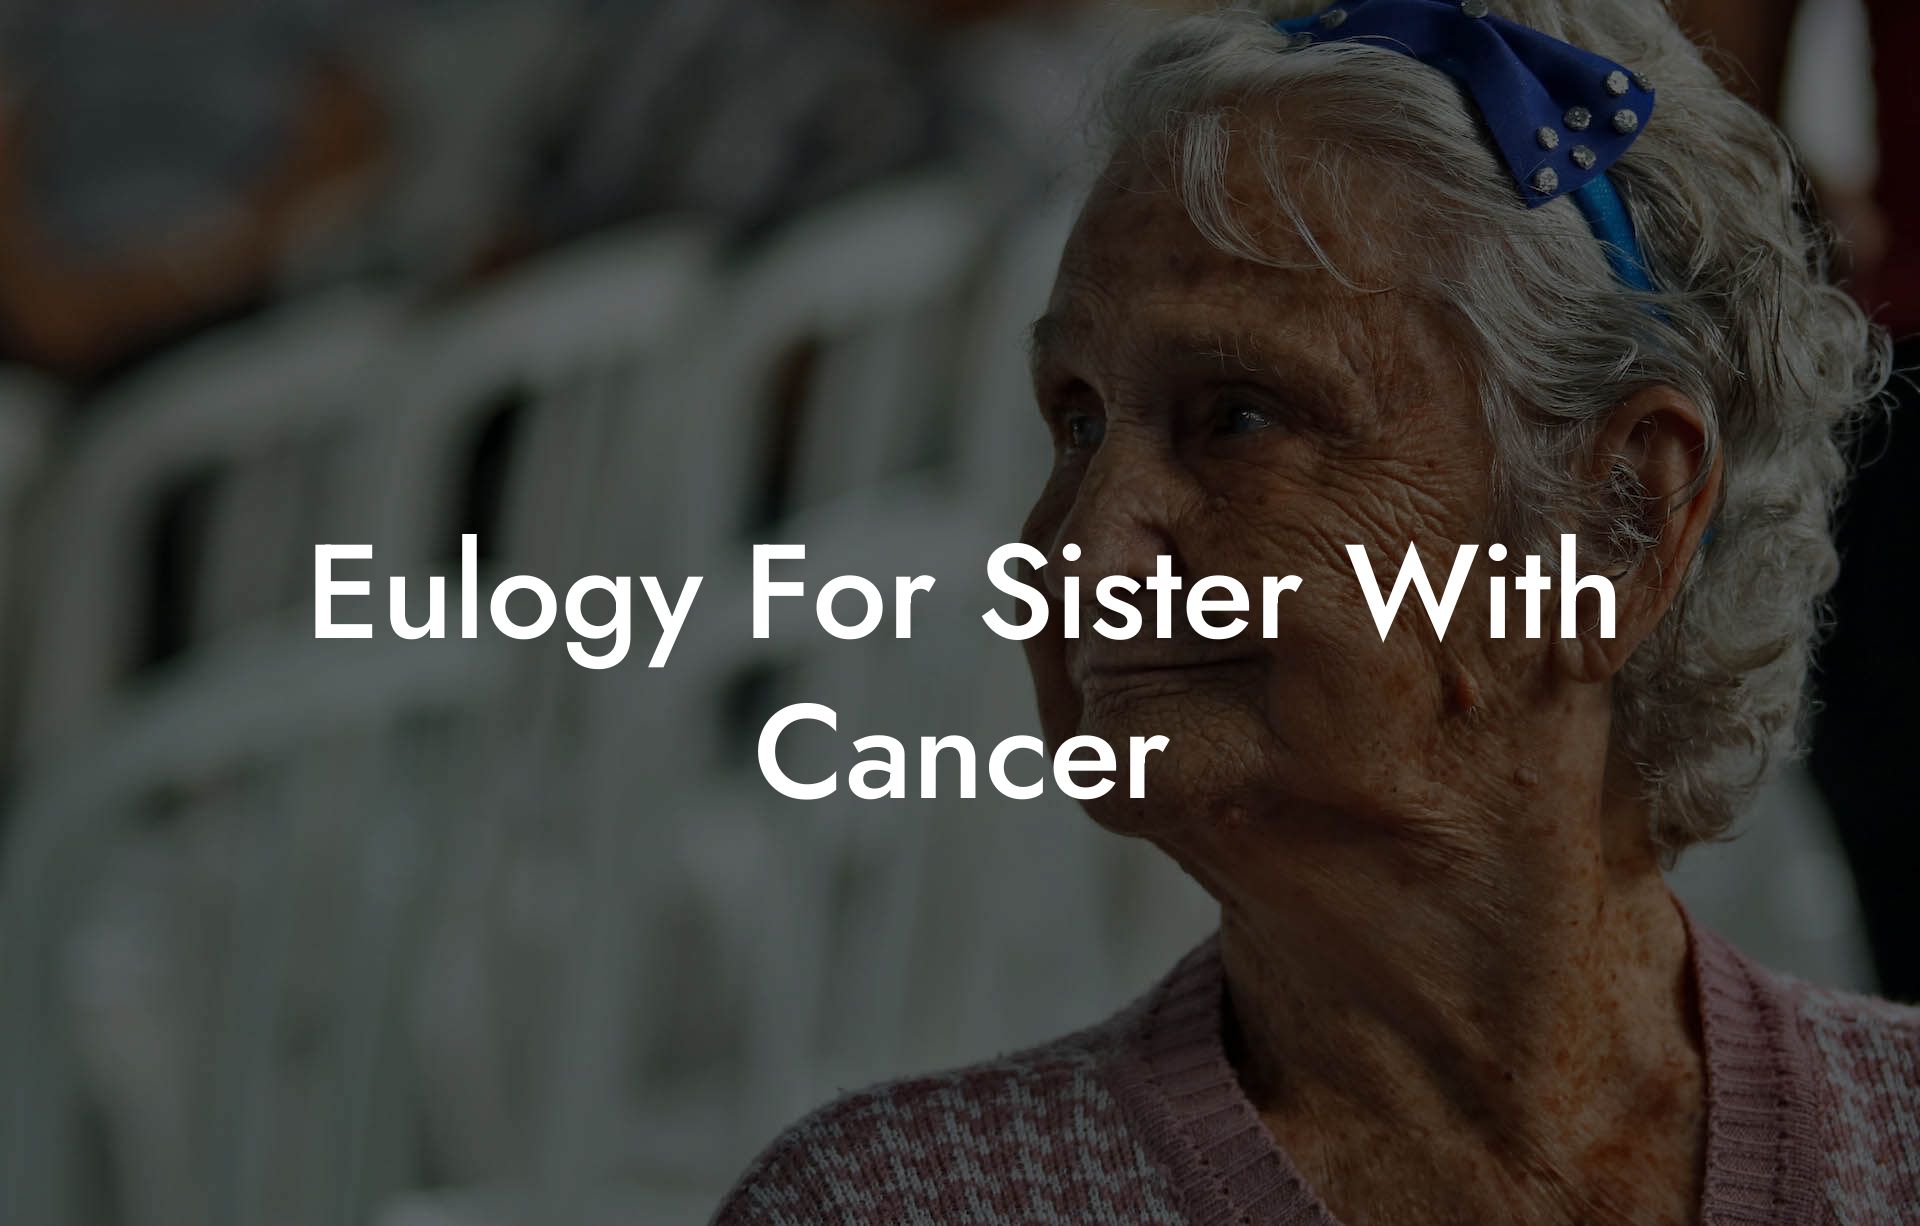 Eulogy For Sister With Cancer